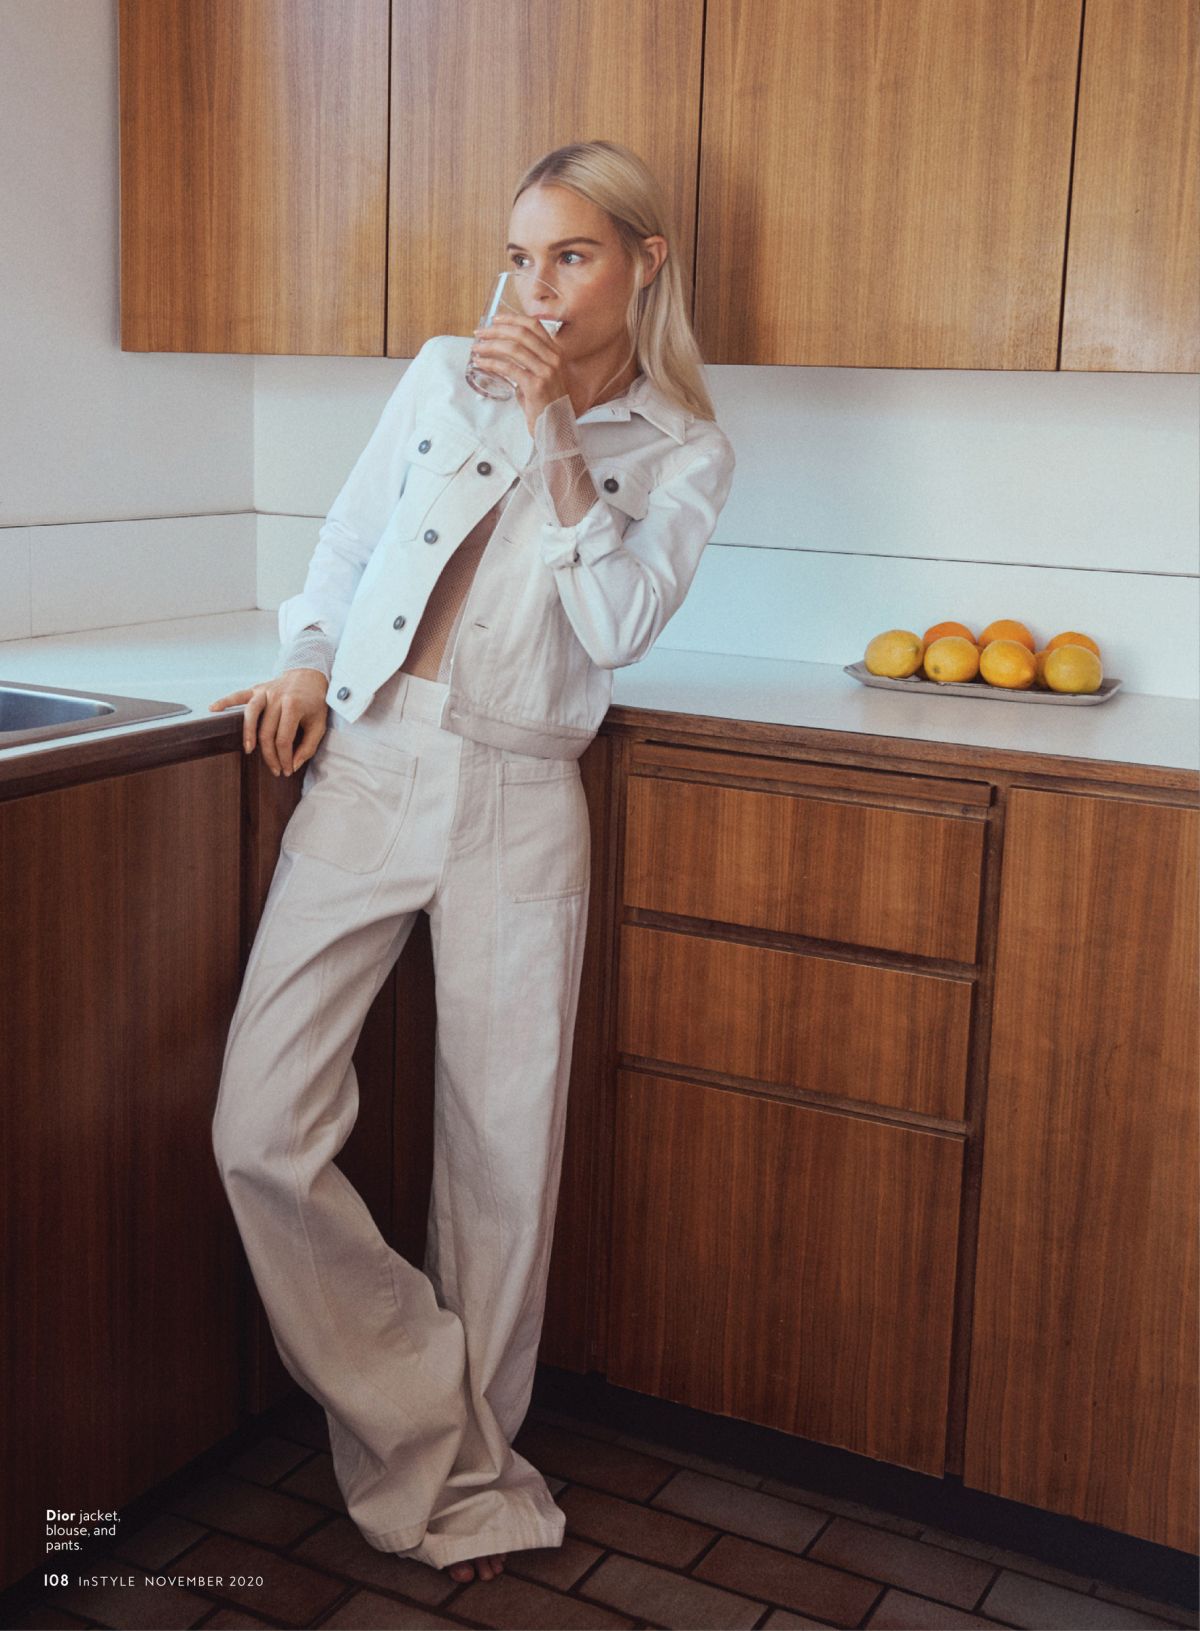 Kate Bosworth in Instyle Magazine, November 2020 Issue 3